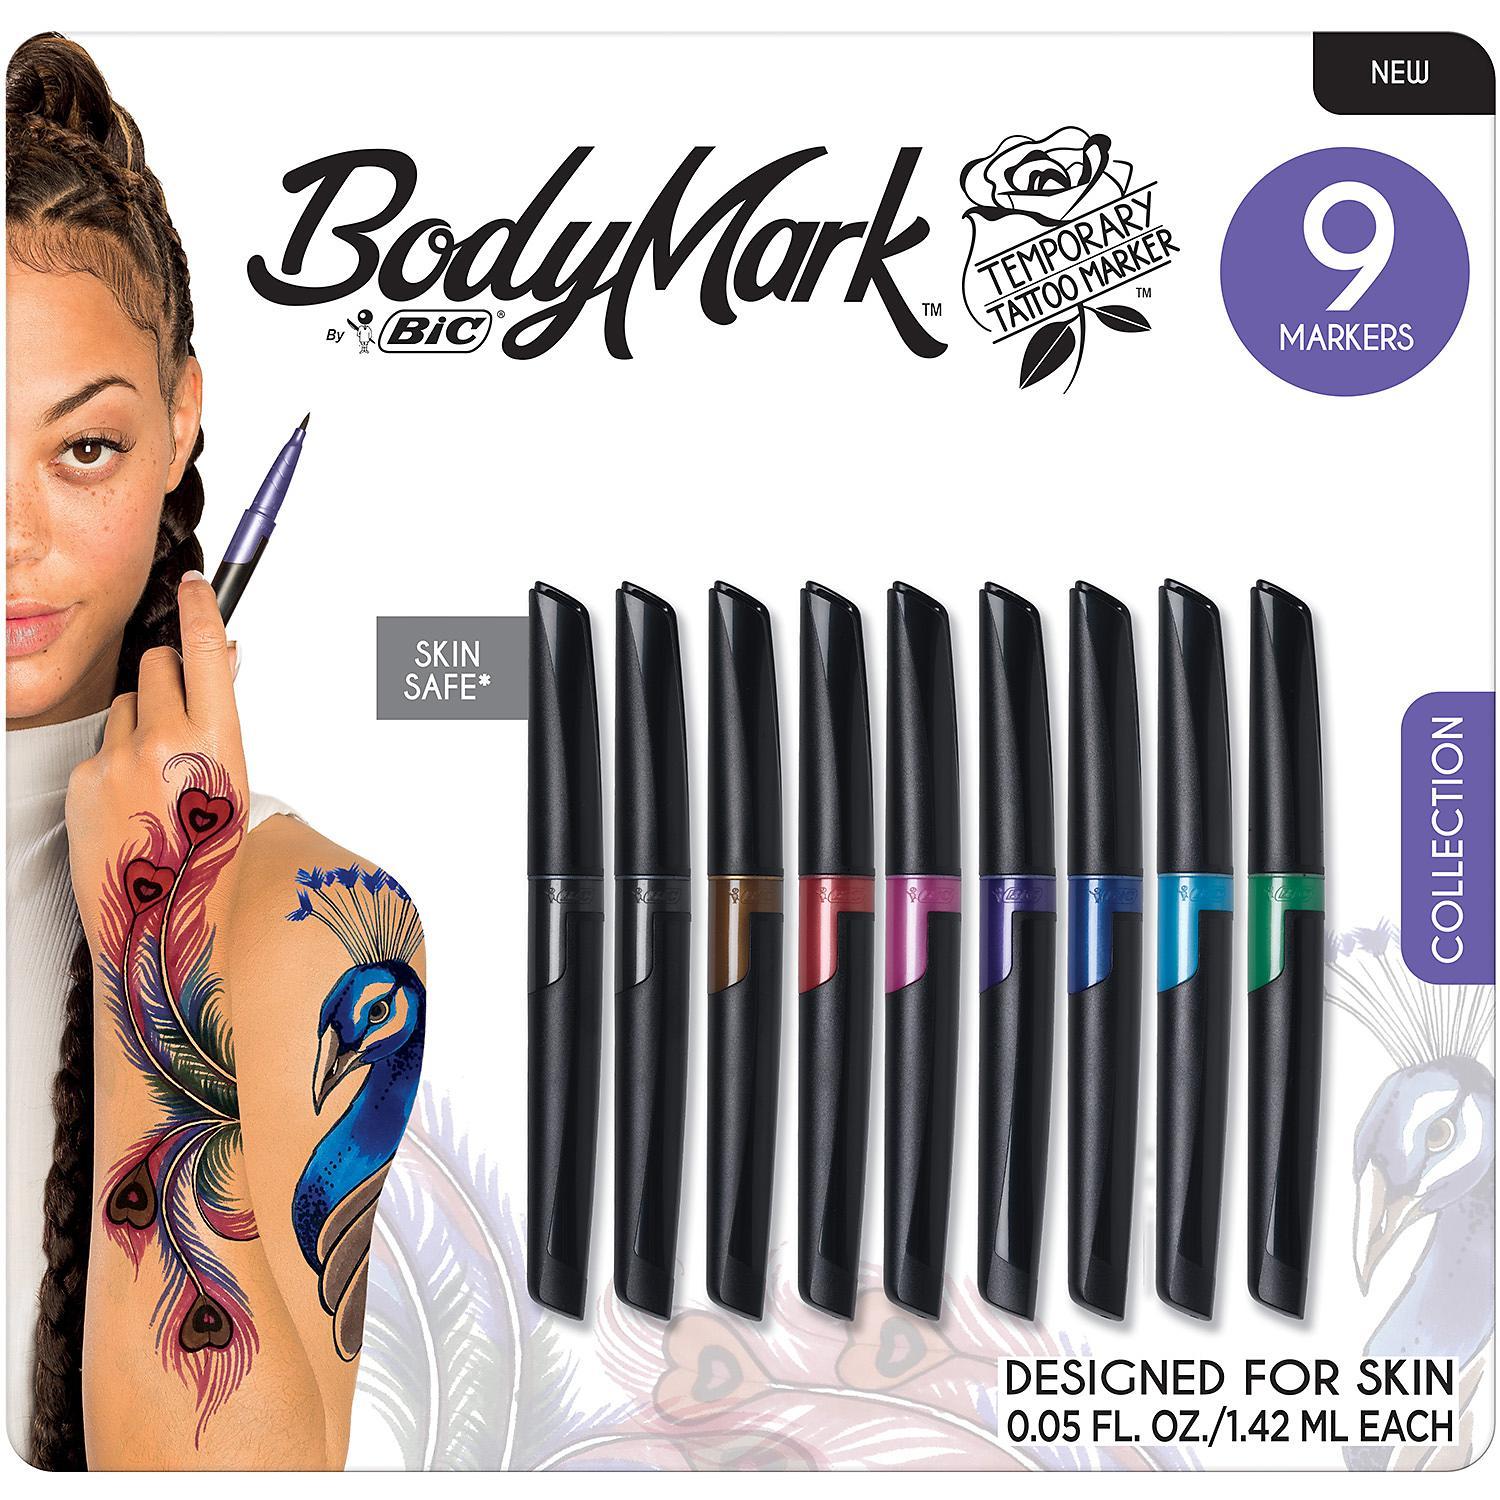 SET OF 9 ASSORTED COLORS BIC BODYMARK TEMPORARY TATTOO MARKERS BODY ART MARKERS M*A*D Minerals Makeup, LLC 